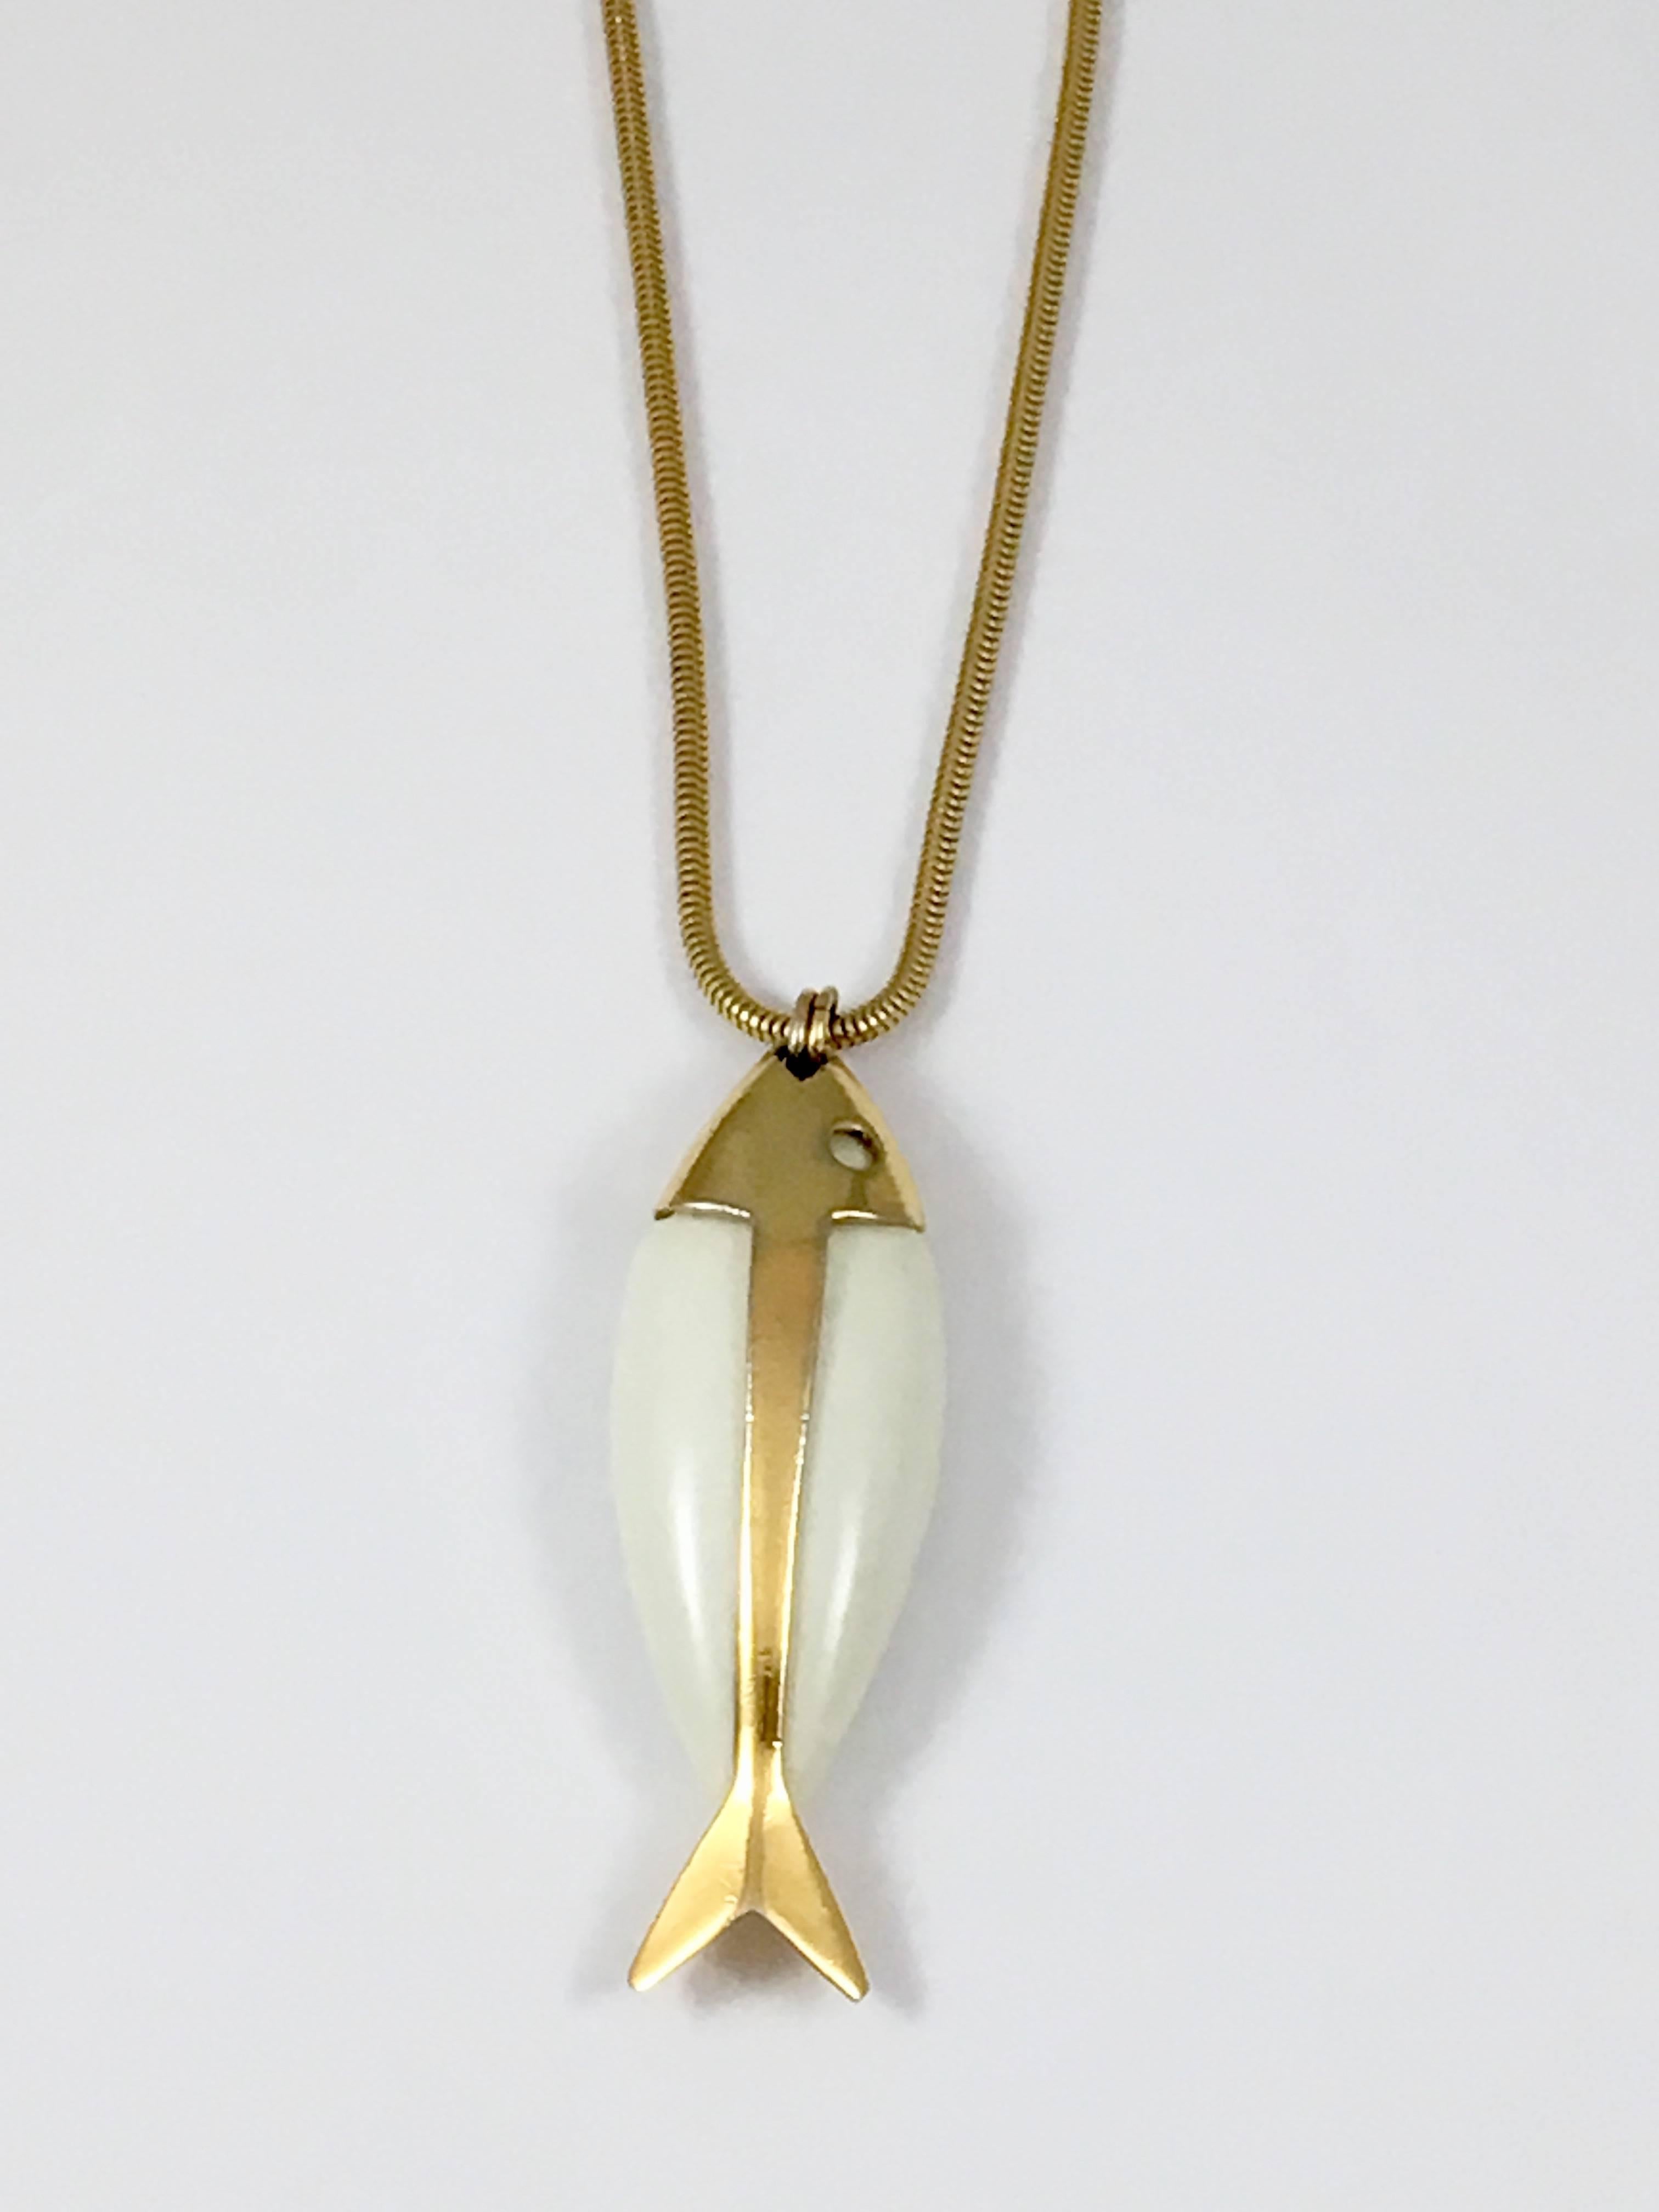 This Trifari fish pendant necklace is from the 1970s. It features a white resin and gold toned metal fish pendant measuring 3 1/2 inches long x 1 1/8 inches wide. It hangs from a gold toned snake chain measuring 34 inches long. The necklace is in